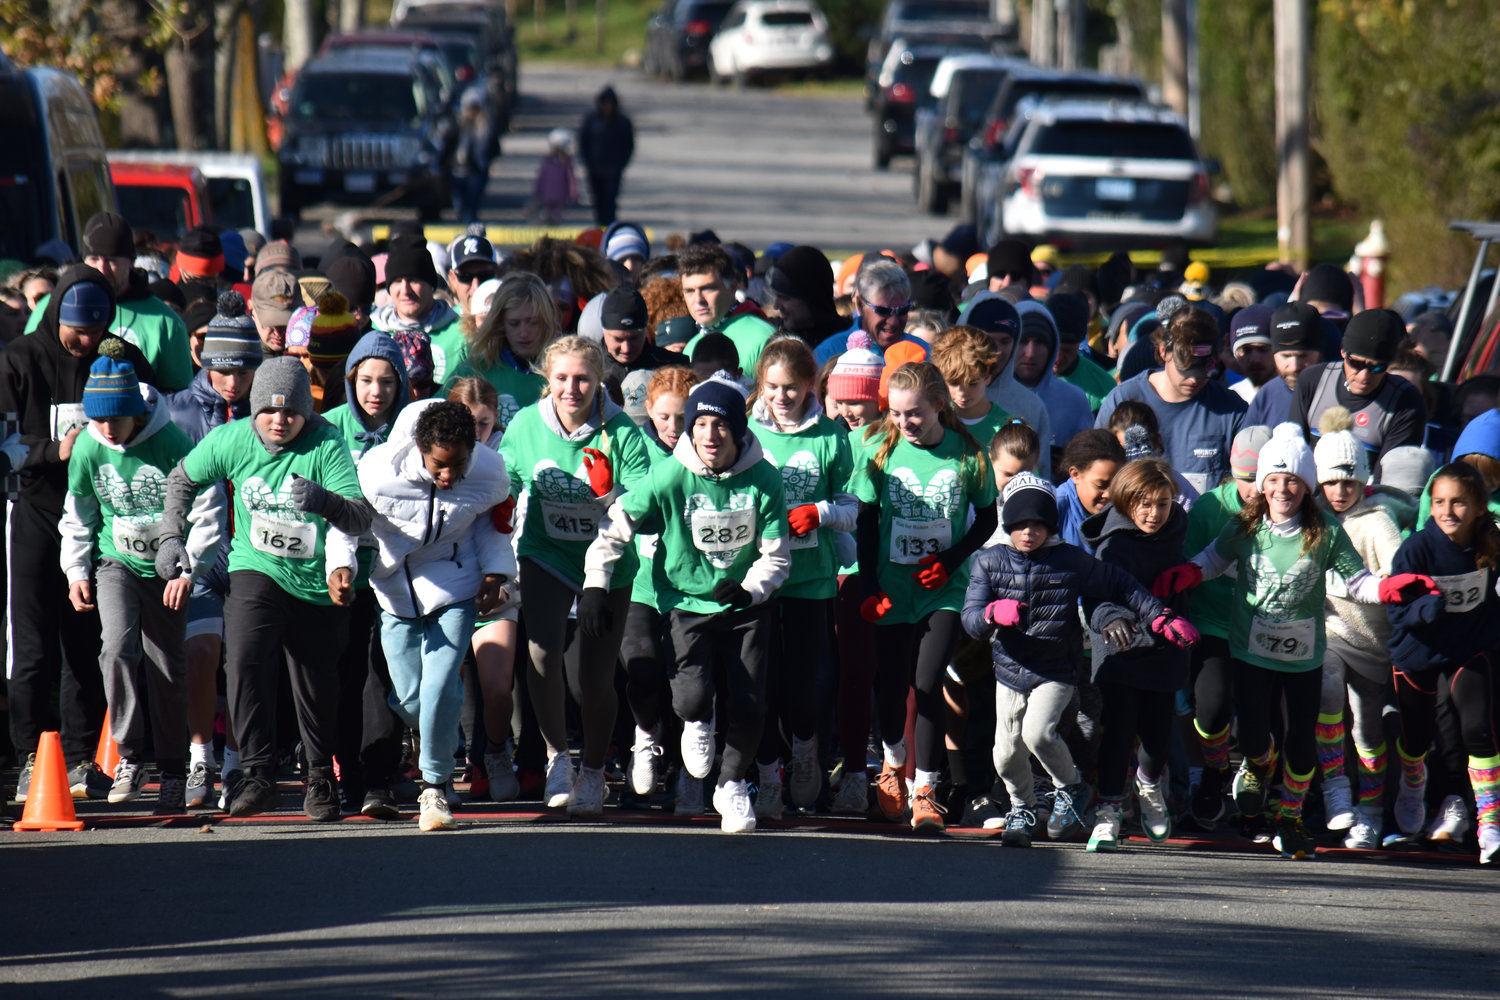 Sunday's eighth annual Run for Robin at the Sconset Casino drew about 700 runners and walkers.